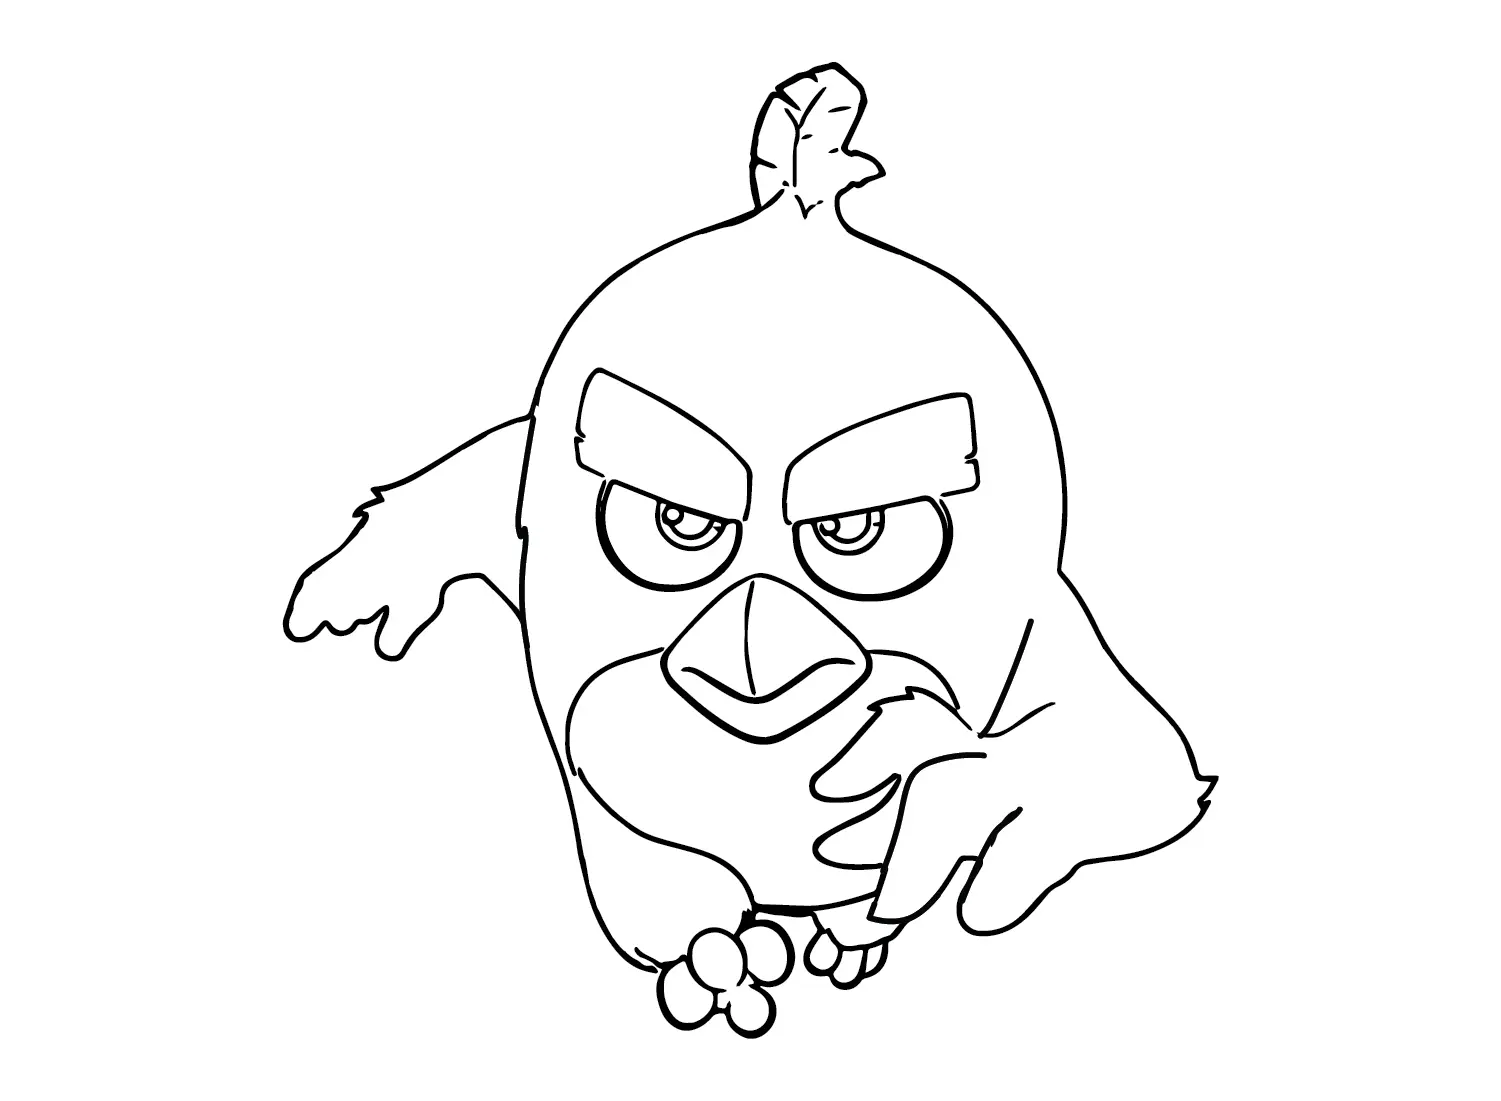 Red Angry Bird Coloring Pages